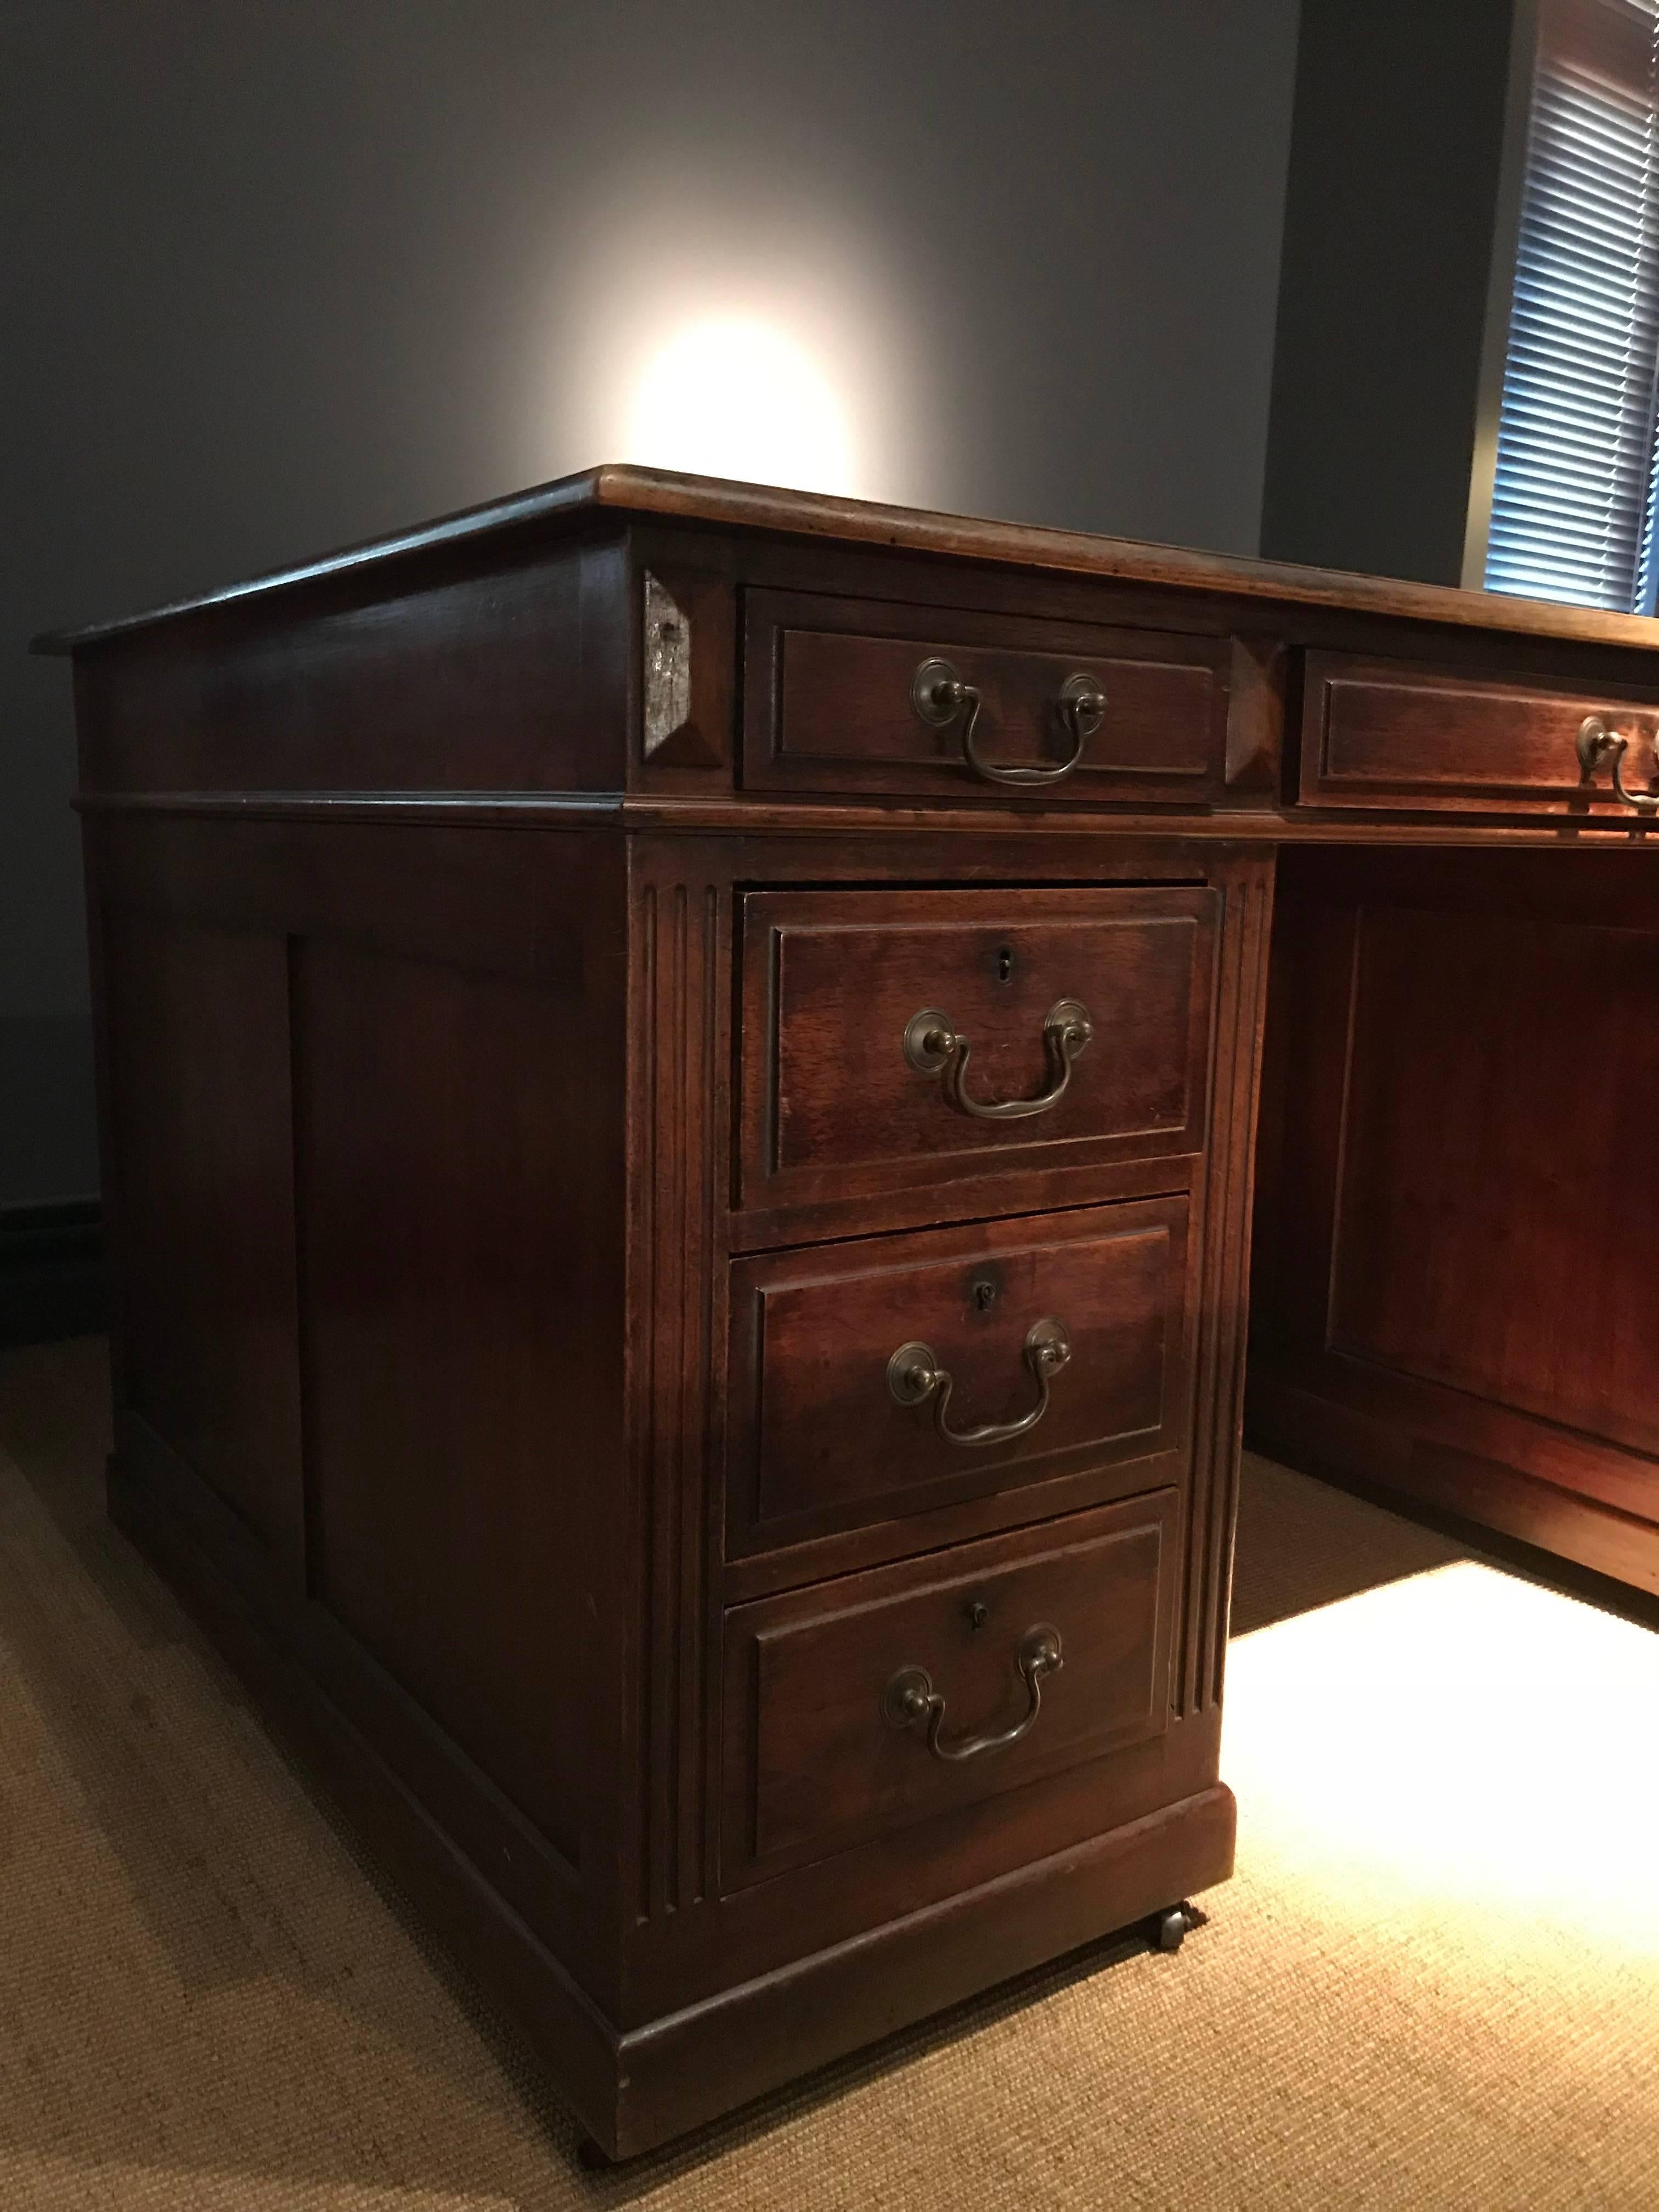 English Mahogany Writing Desk, Bureau In Excellent Condition For Sale In Schellebelle, BE